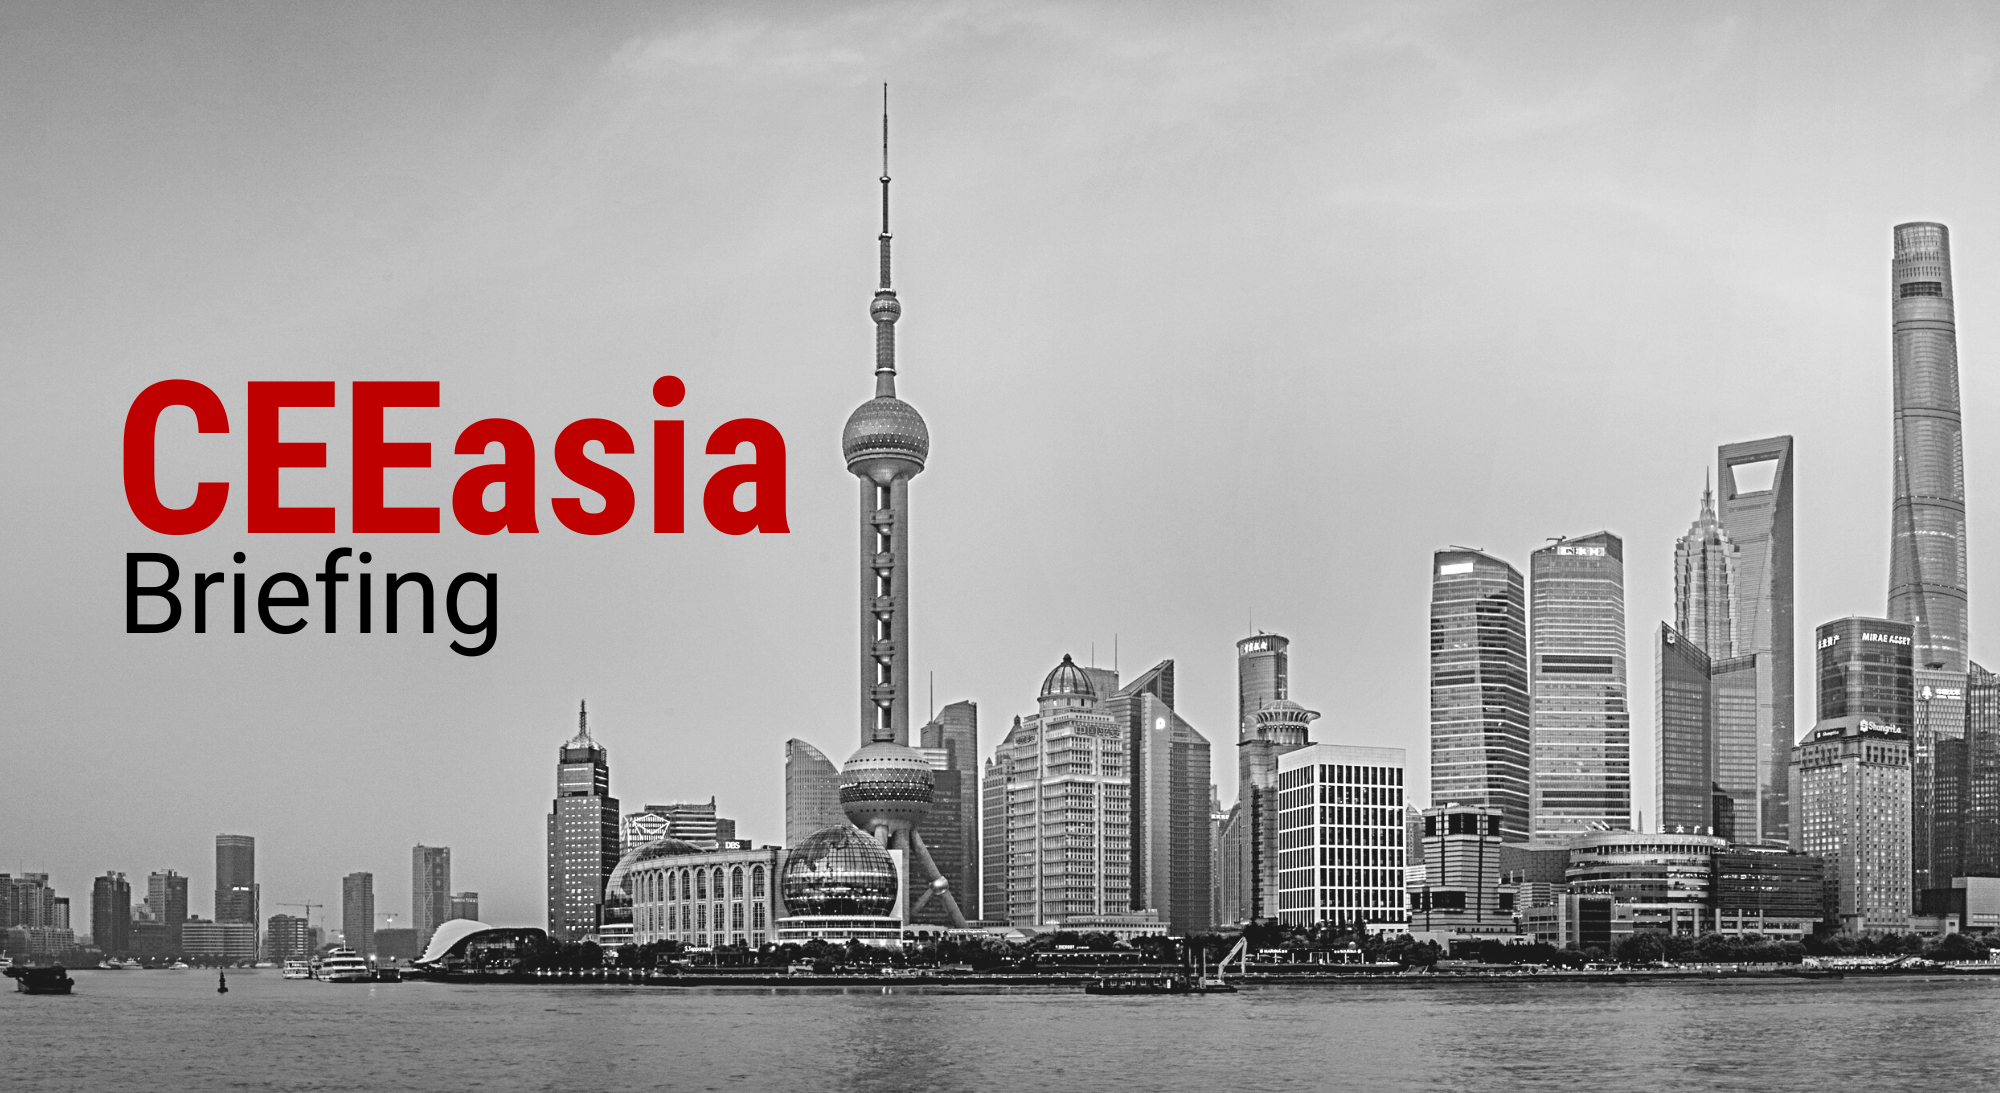 CEEasia Briefing #23: Challenge to Orbán’s China Policy, Chinese Presence in Serbia, a New EU Taiwan Policy?, V4-Korea Business Forum